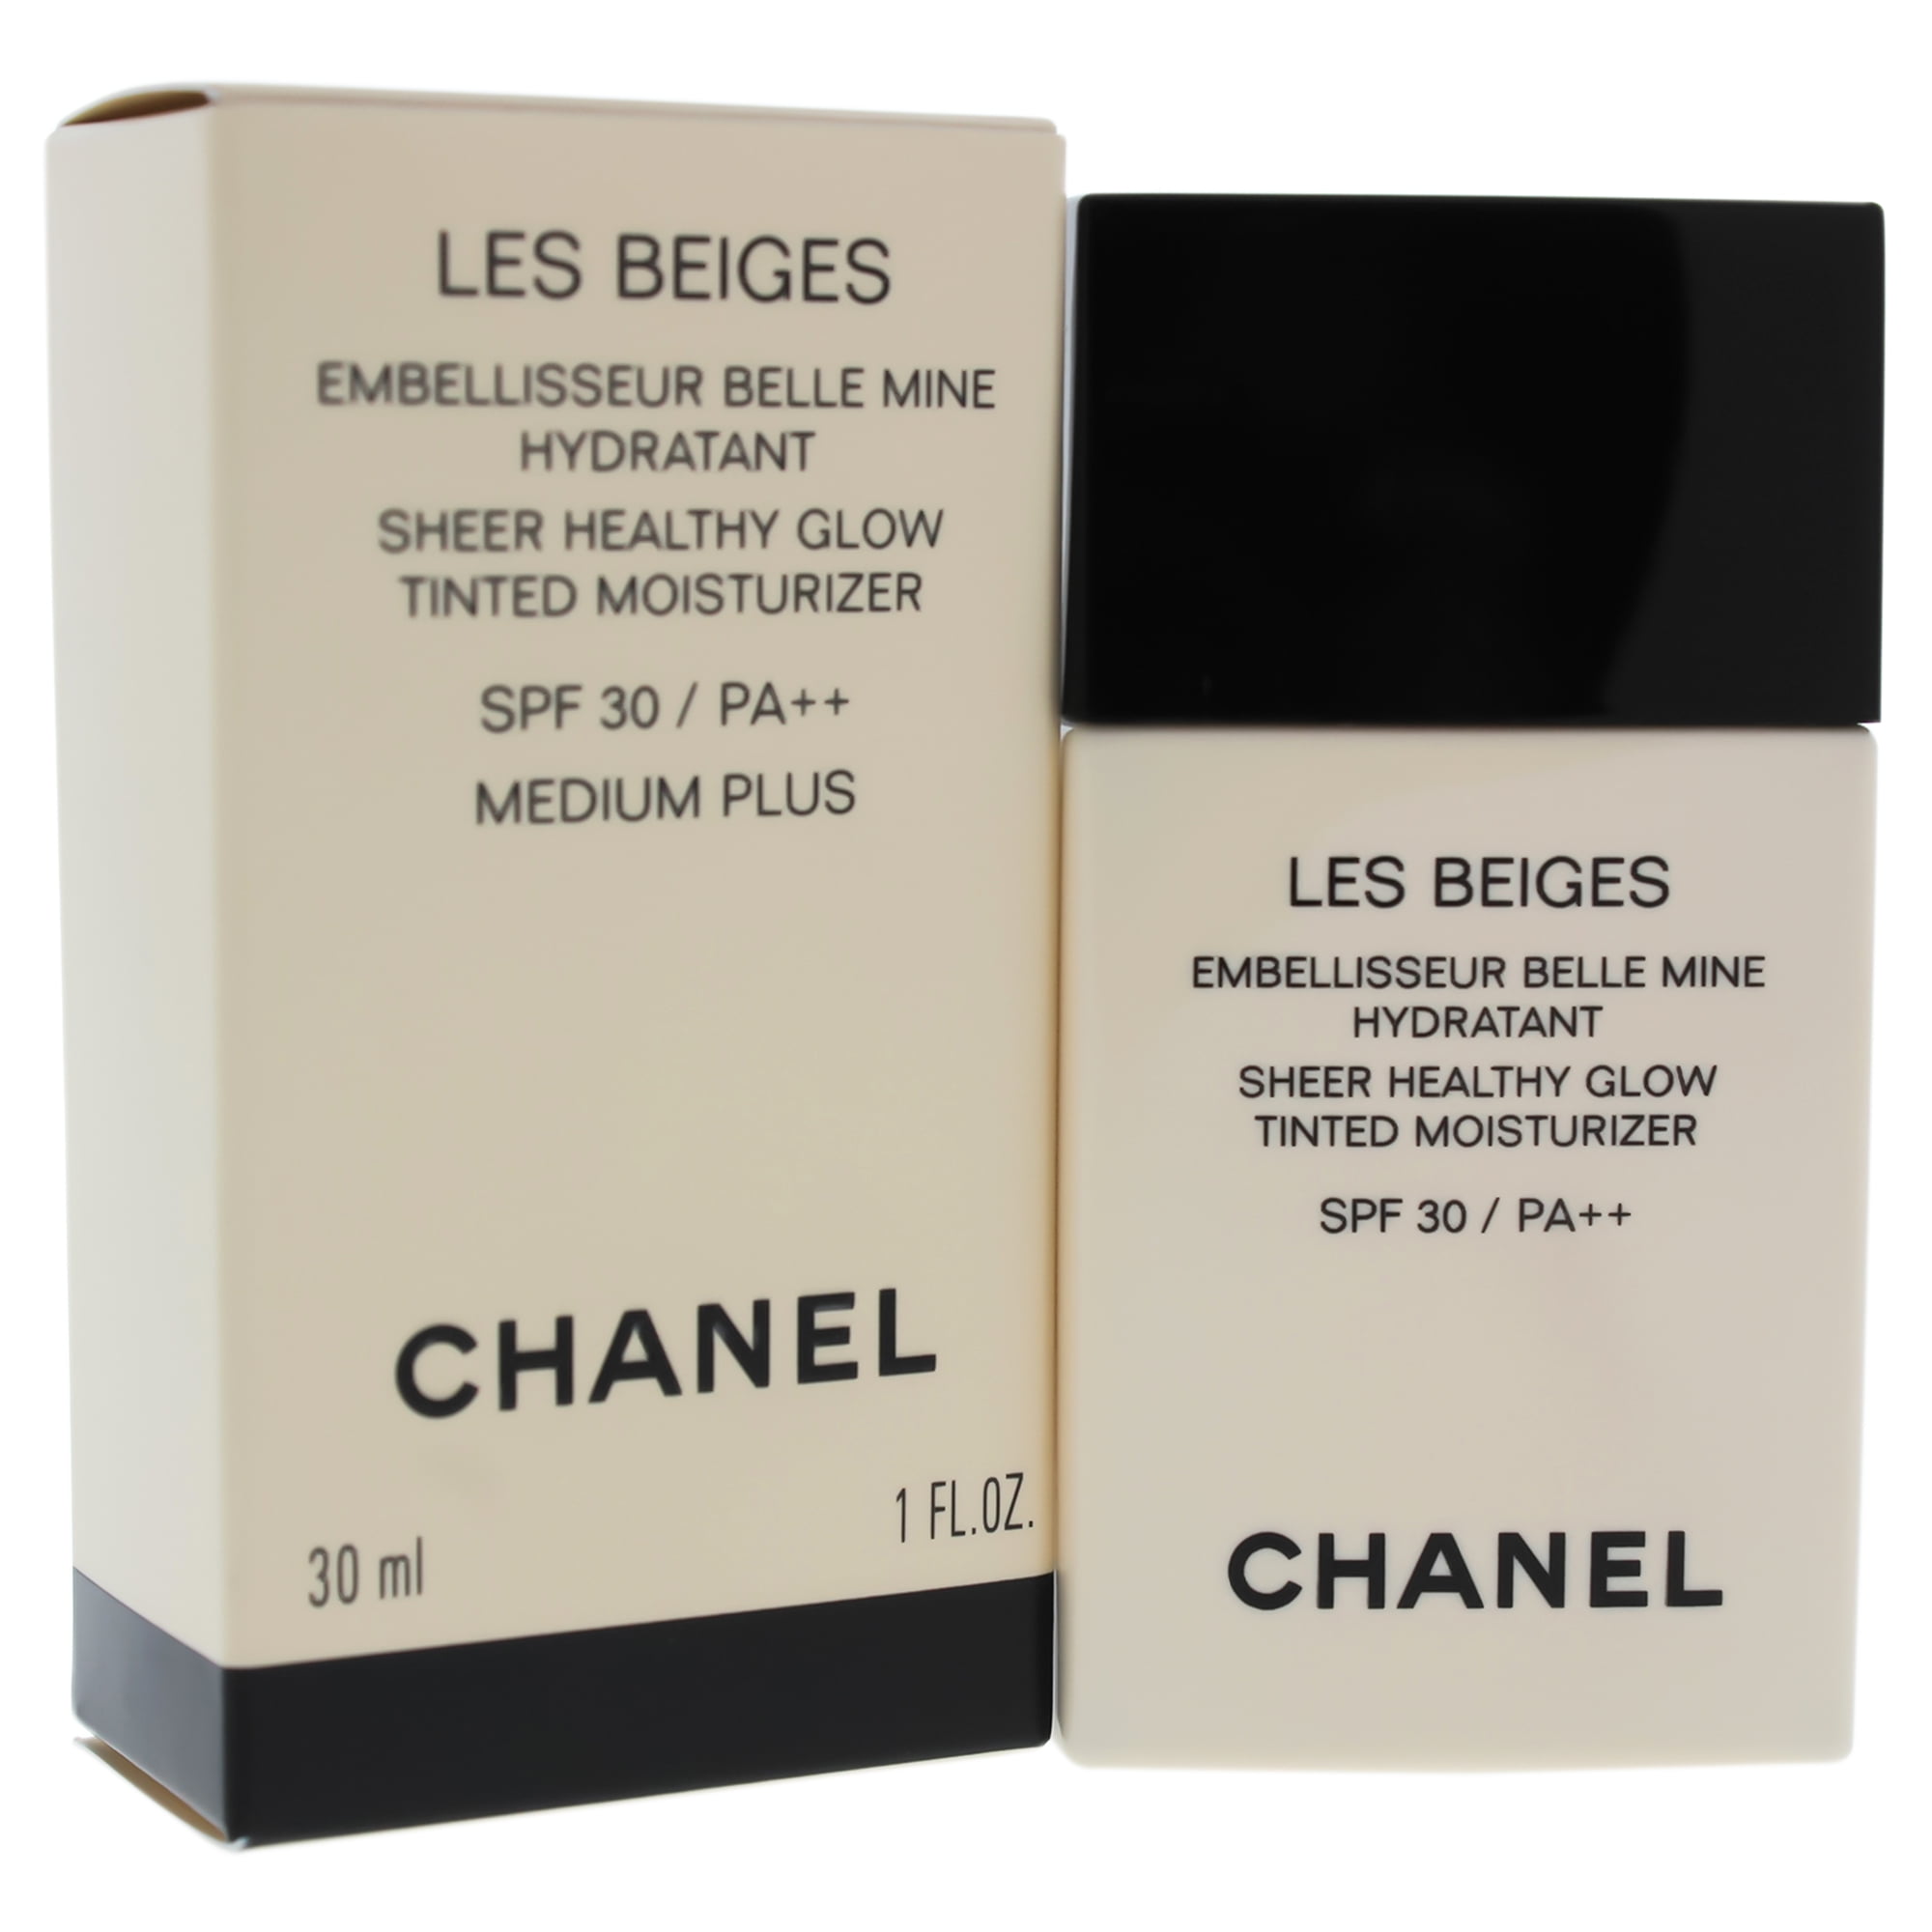 CHANEL Les Beiges Sheer Healthy Glow Moisturizing Tint Broad Spectrum SPF  30 Reviews 2023